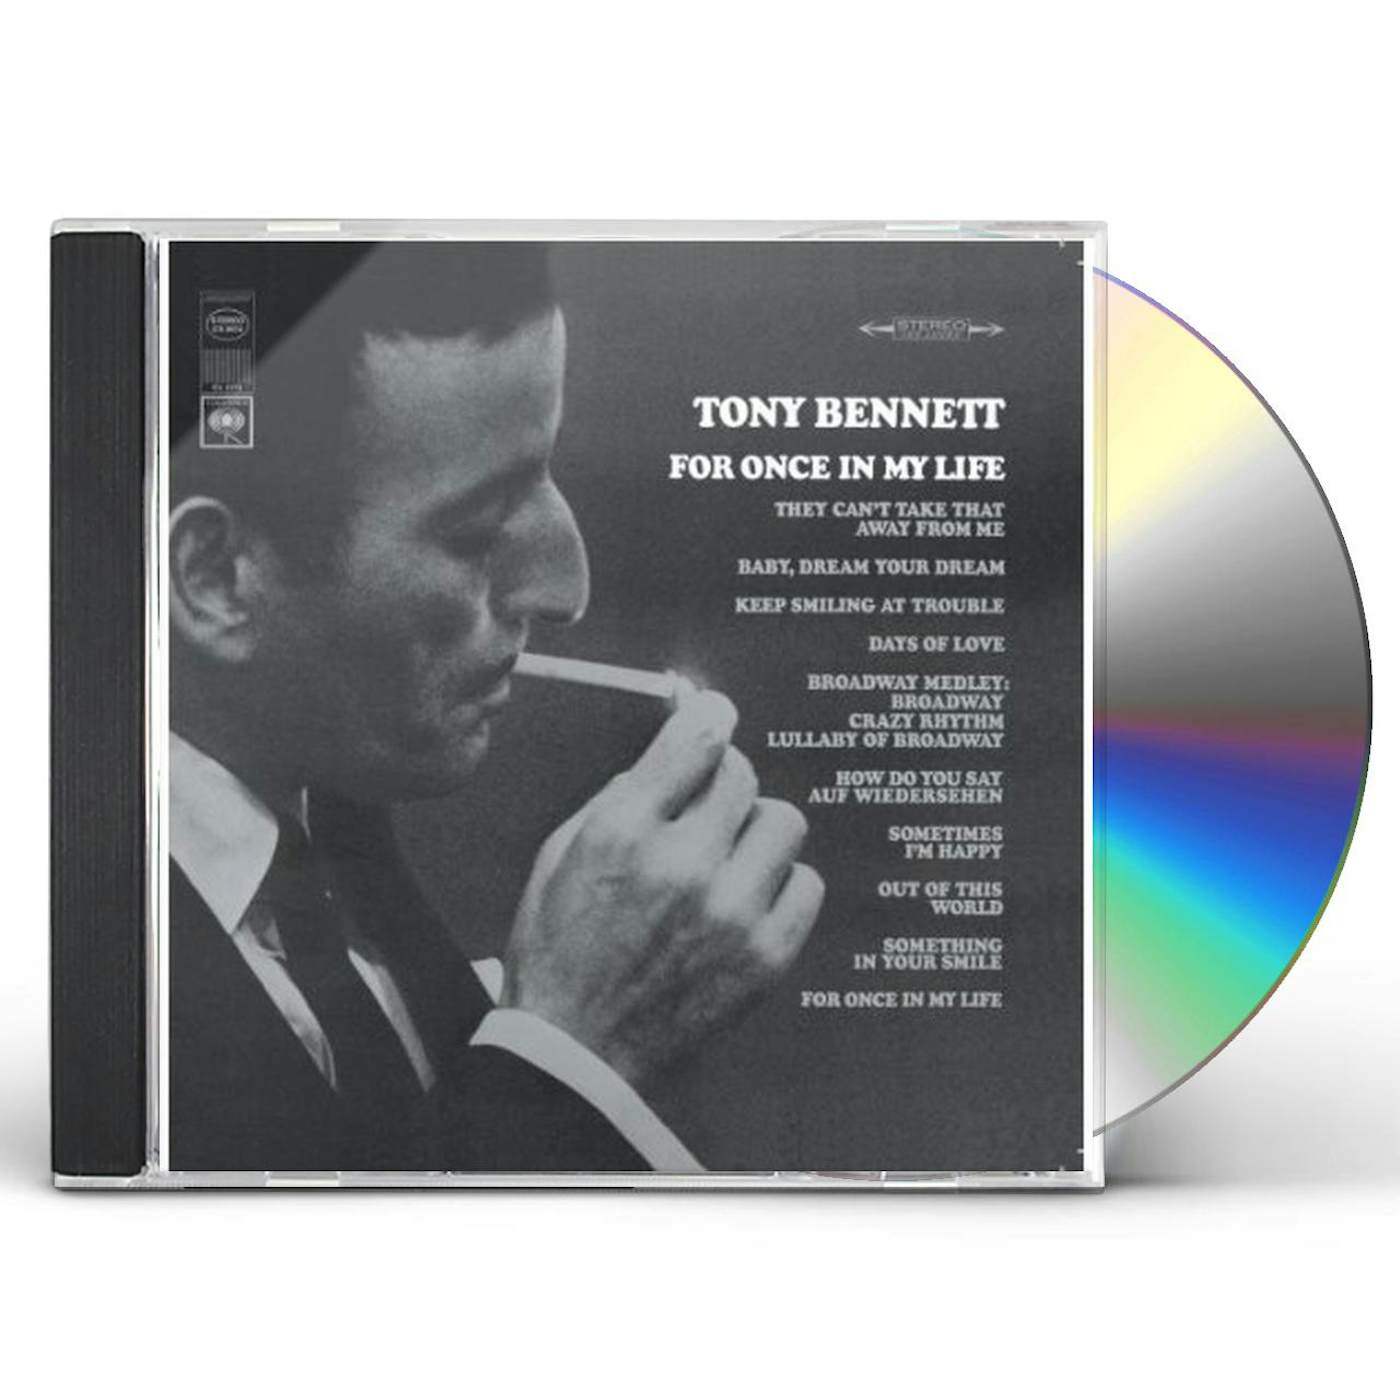 Tony Bennett FOR ONCE IN MY LIFE CD